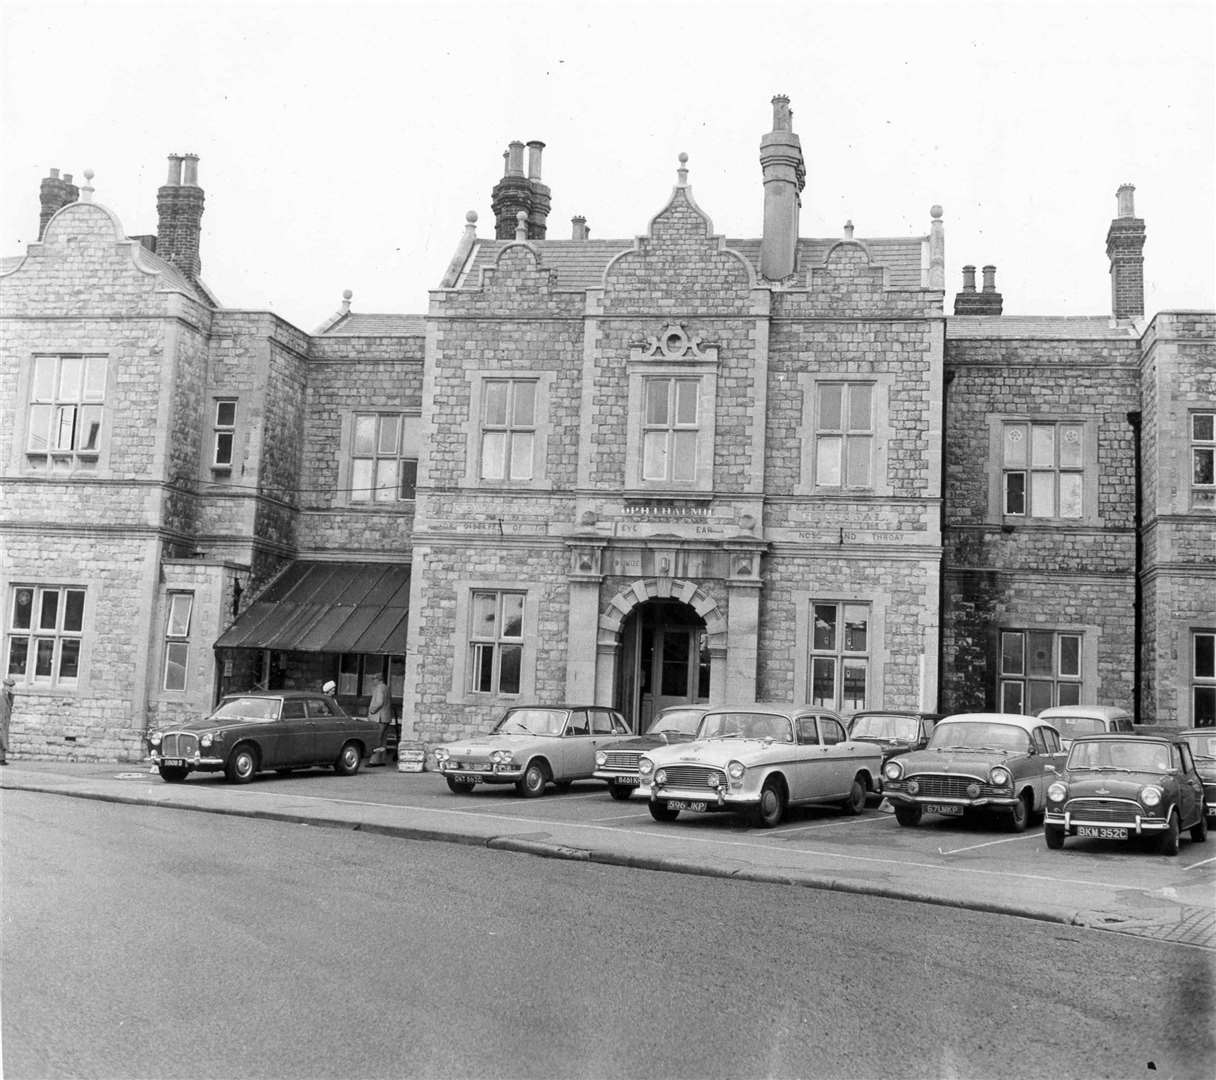 The Ophthalmic Hospital in Maidstone, pictured in 1967, served patients for almost 150 years. It was built in 1852 and merged with the Maidstone Hospital in the 1990s. It is now housing. Picture: Images of Maidstone